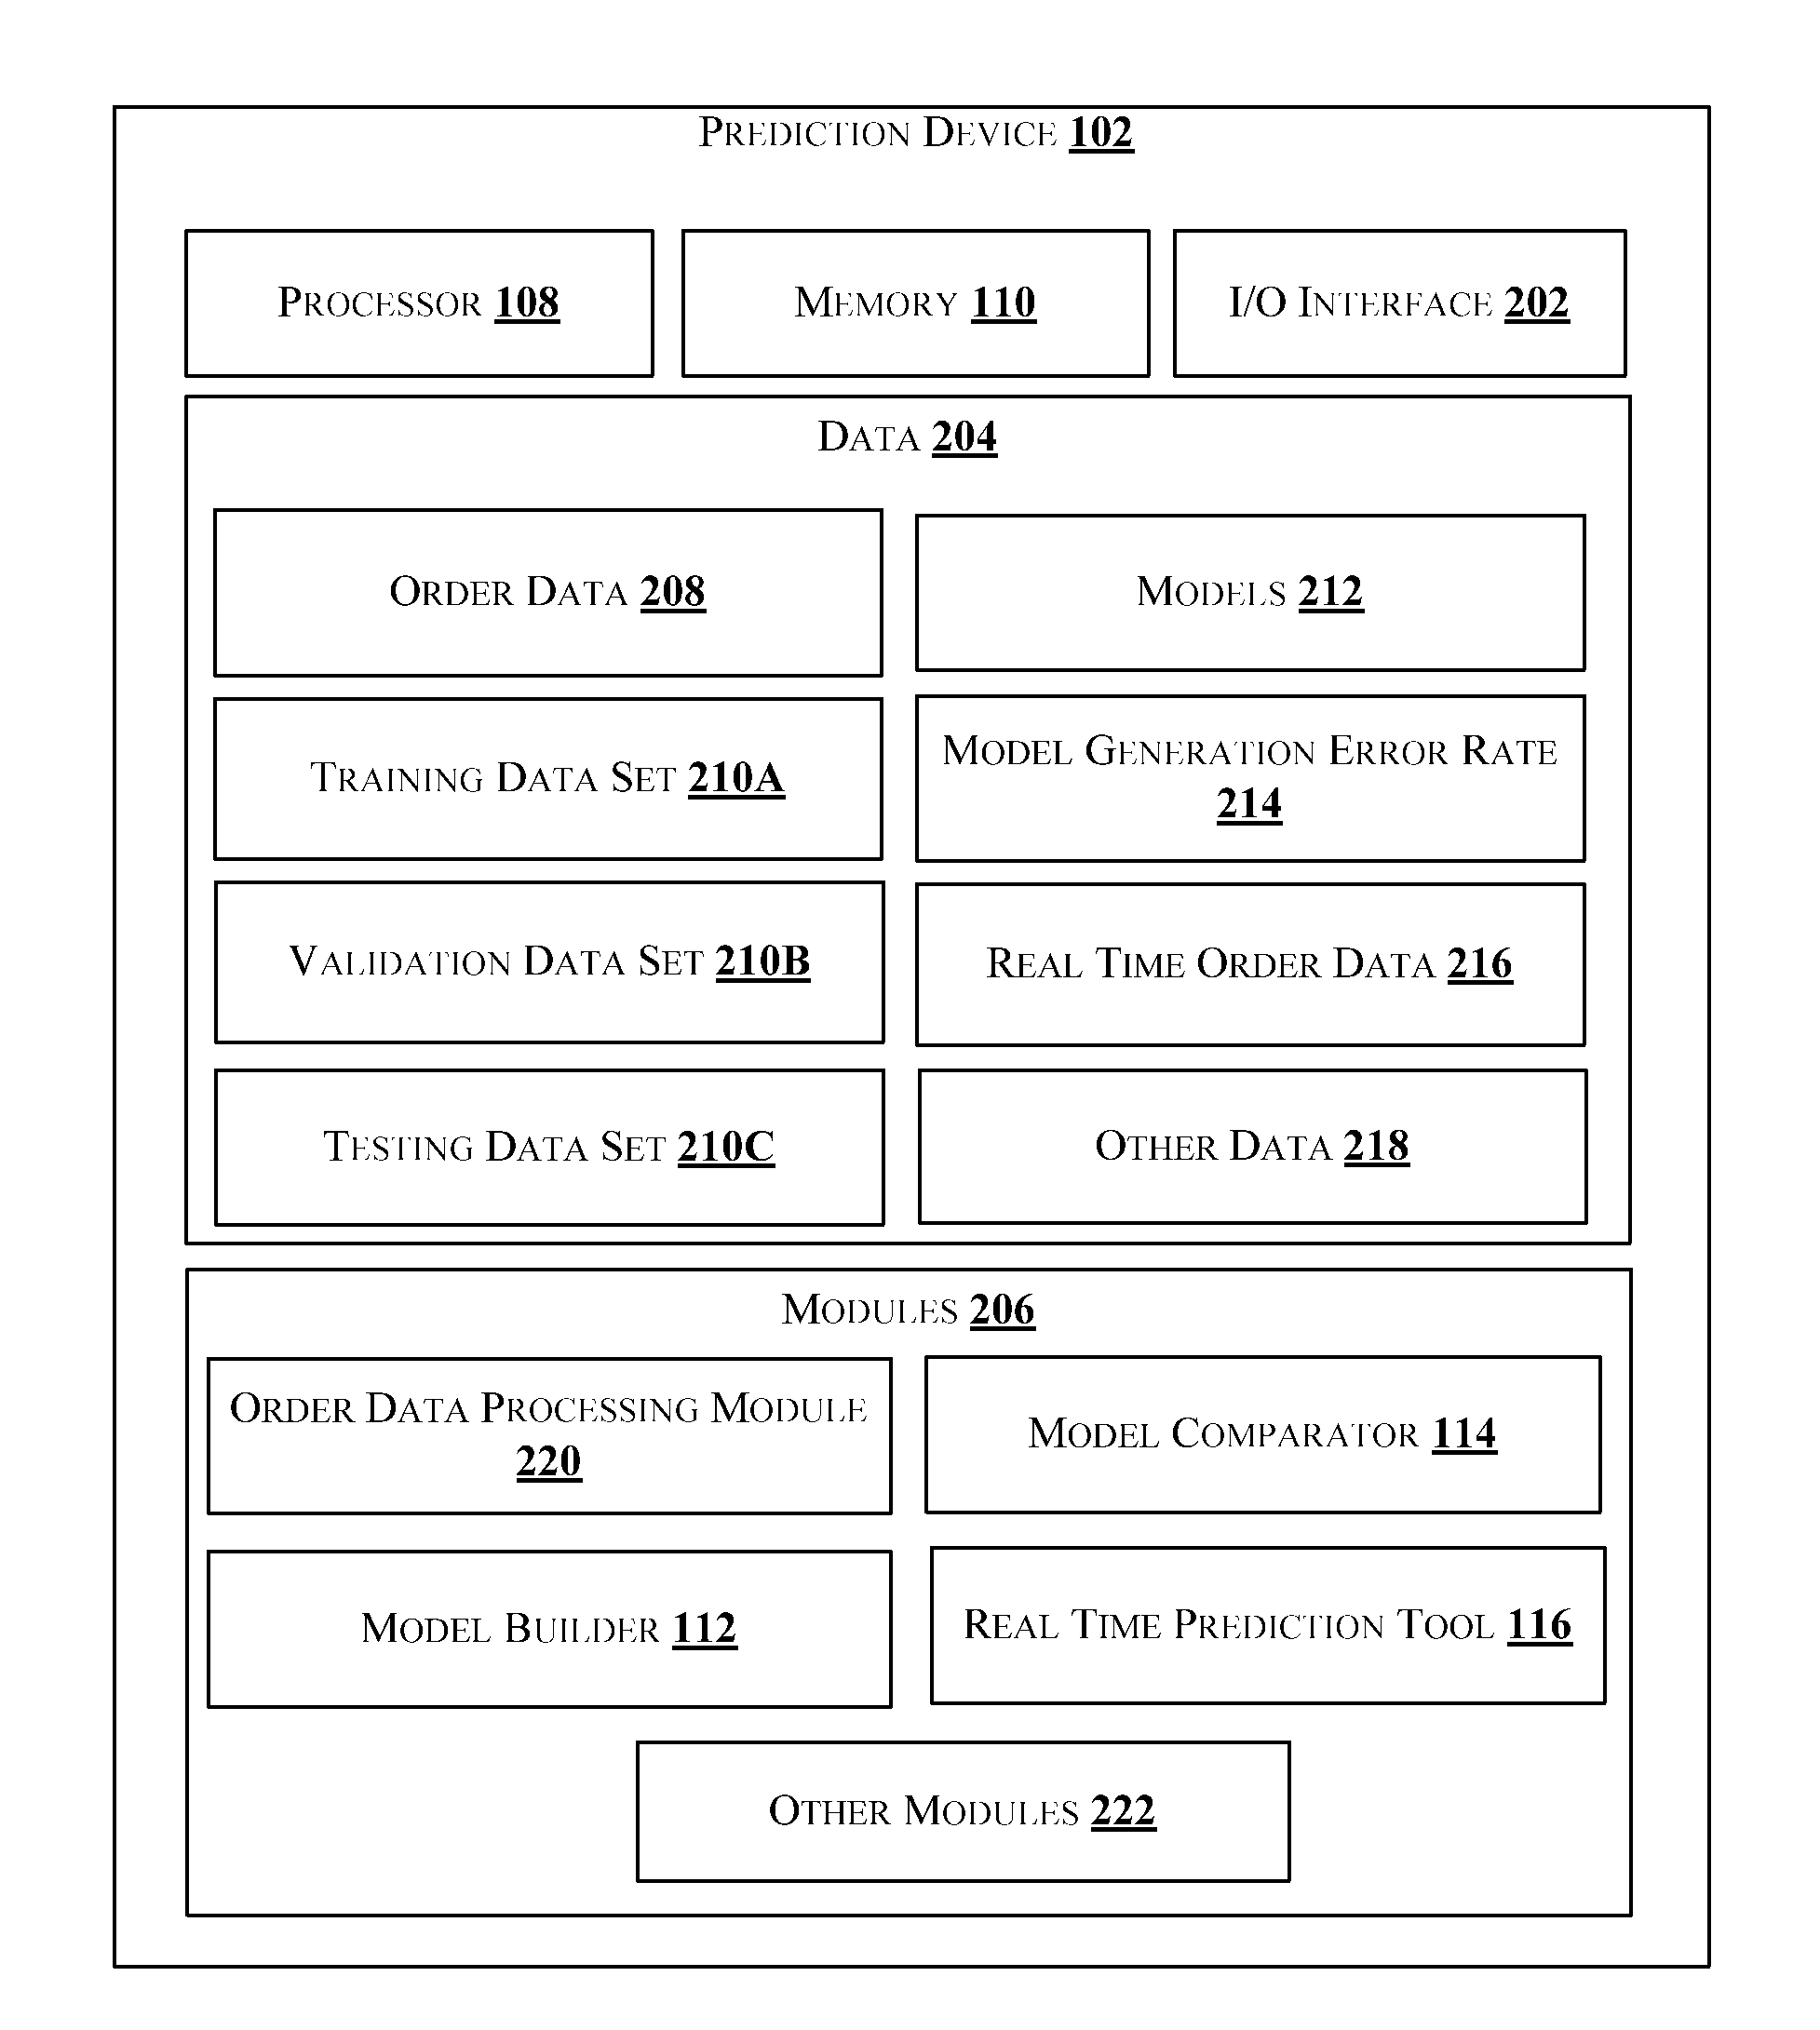 Method and device for real time prediction of timely delivery of telecom service orders